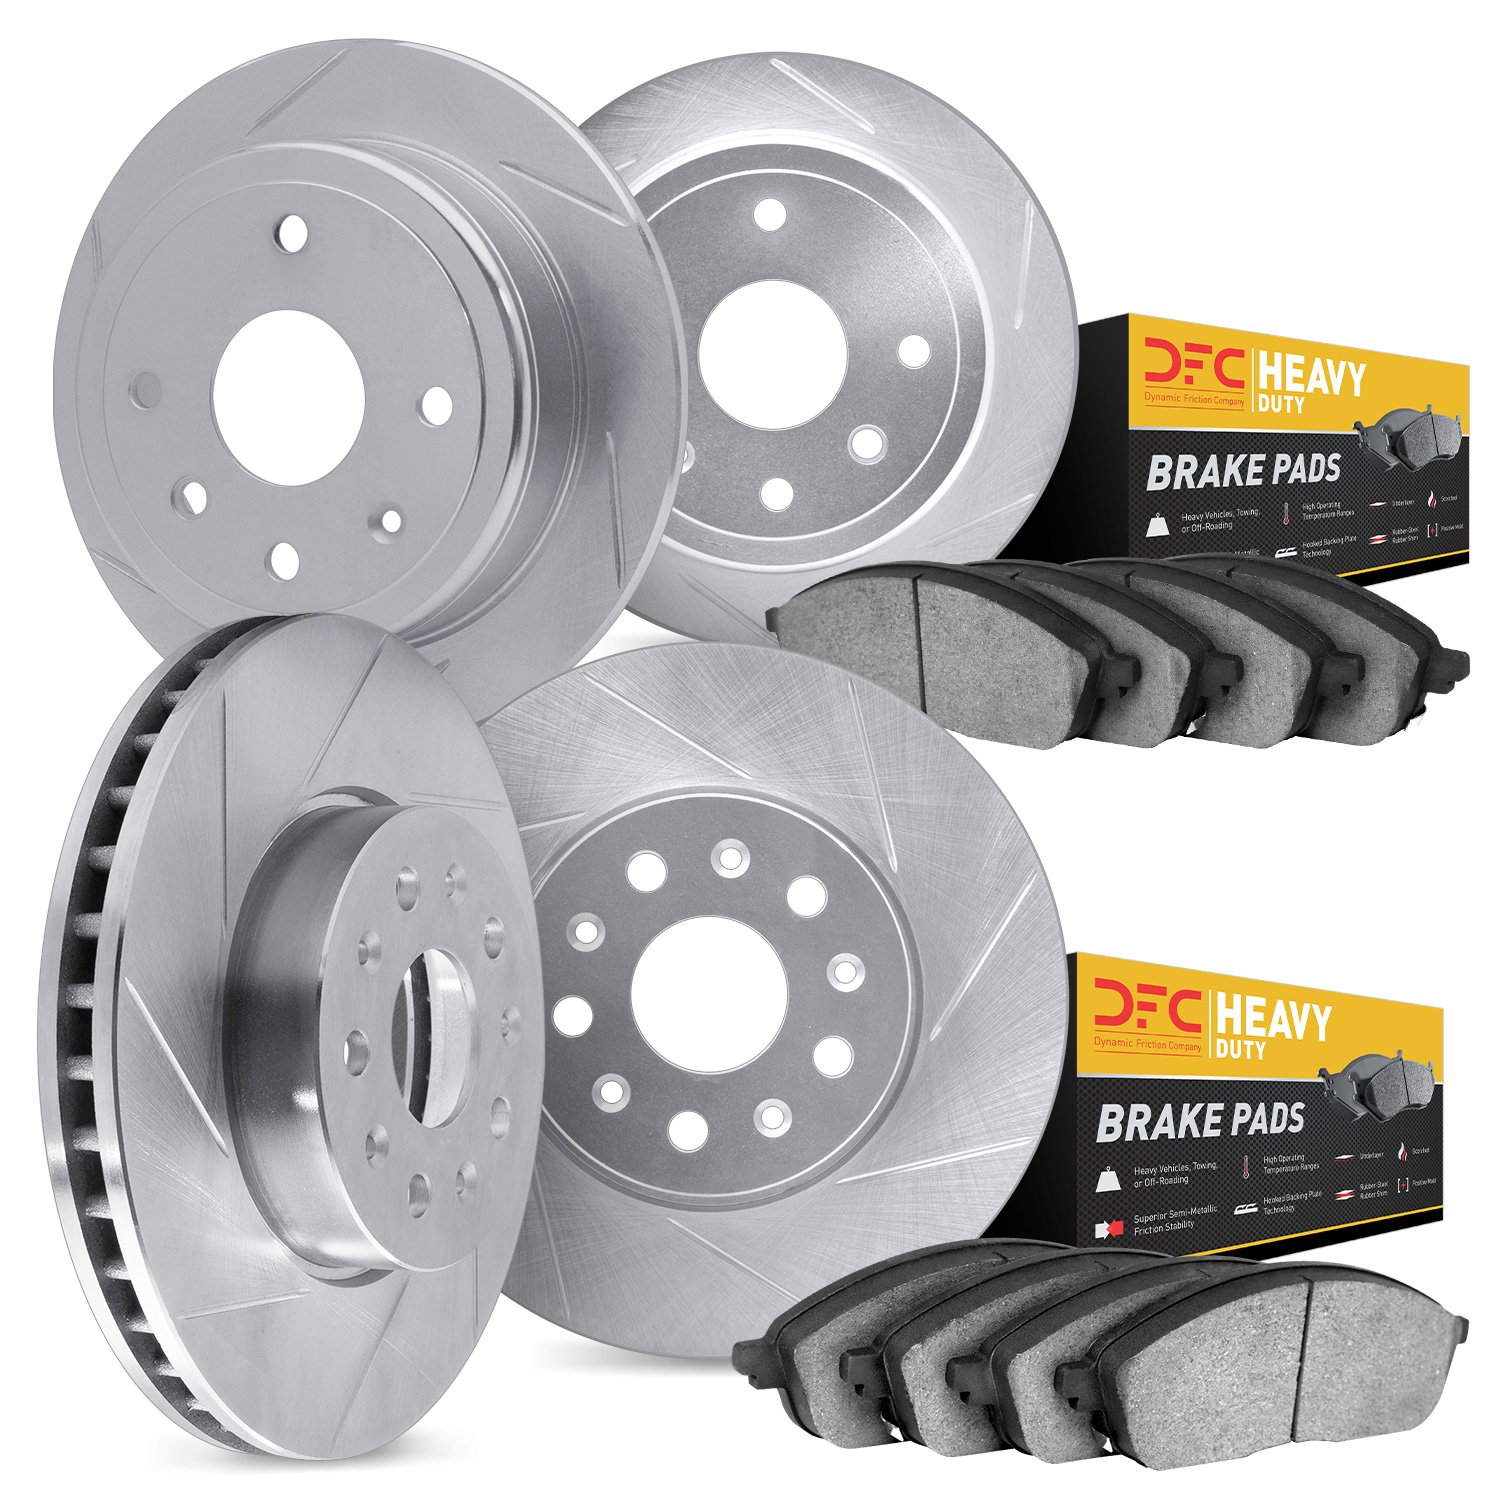 5204-42058 Slotted Brake Rotors w/Heavy-Duty Brake Pads Kits [Silver], 2003-2006 Mopar, Position: Front and Rear